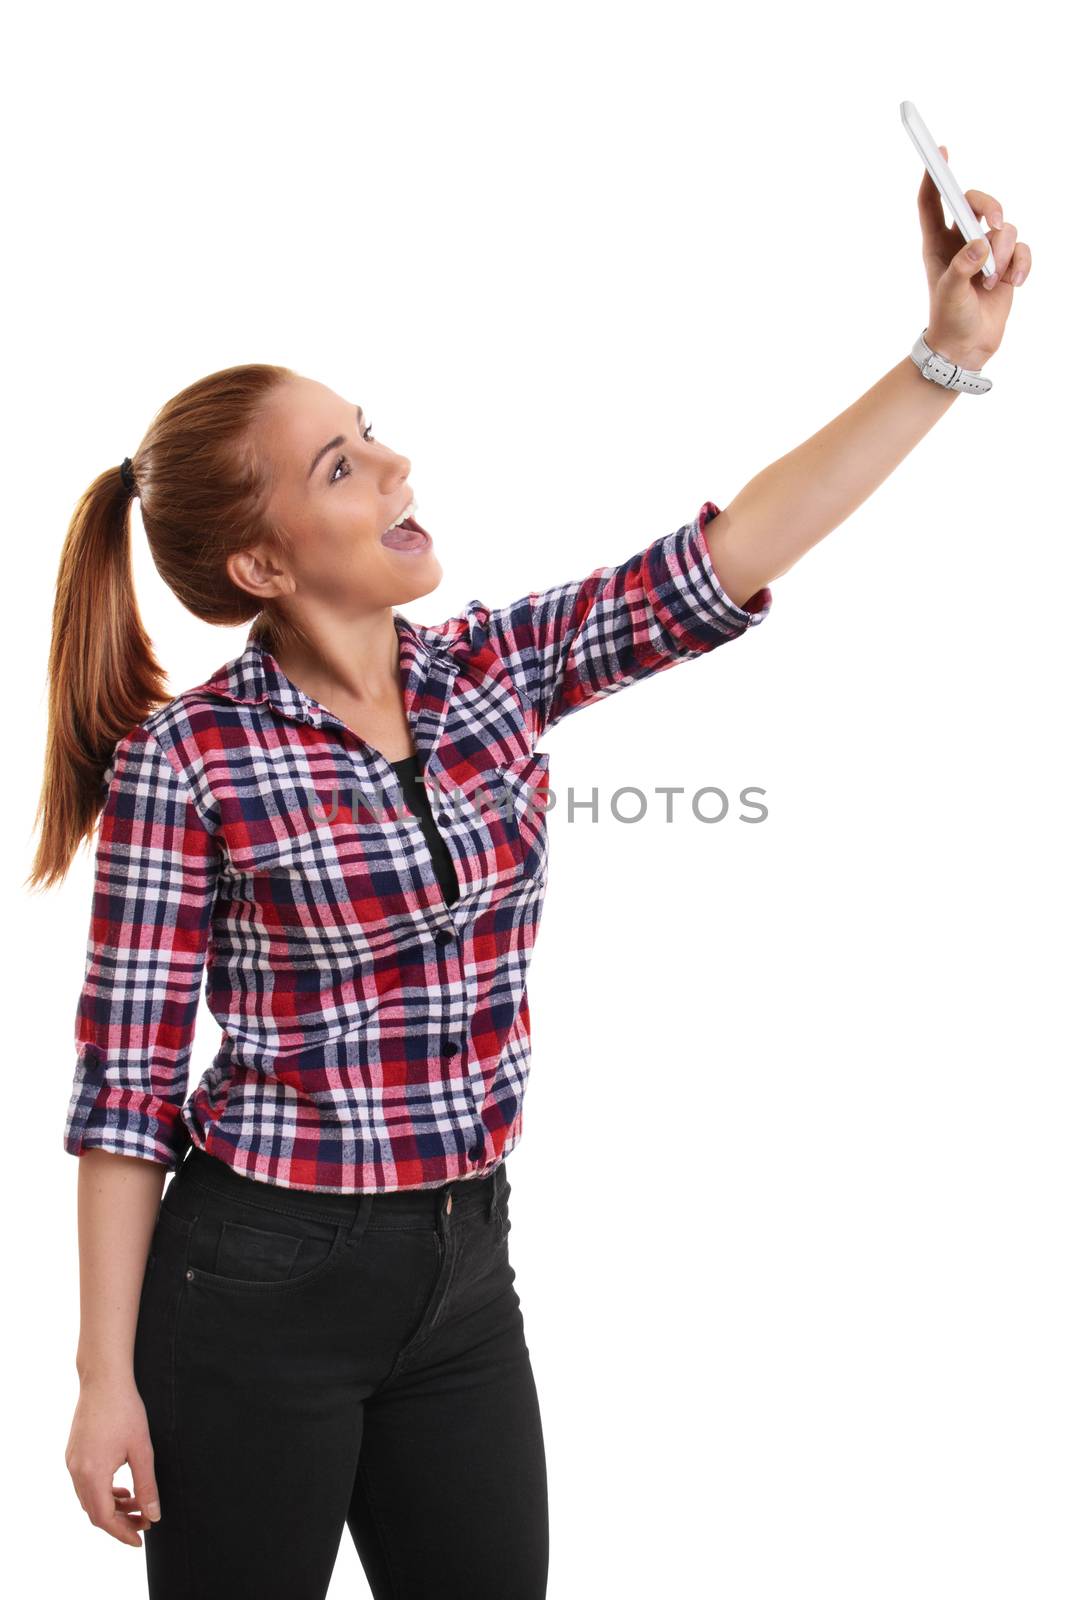 Smiling beautiful young girl dressed in casual clothes taking a selfie, isolated on white background.